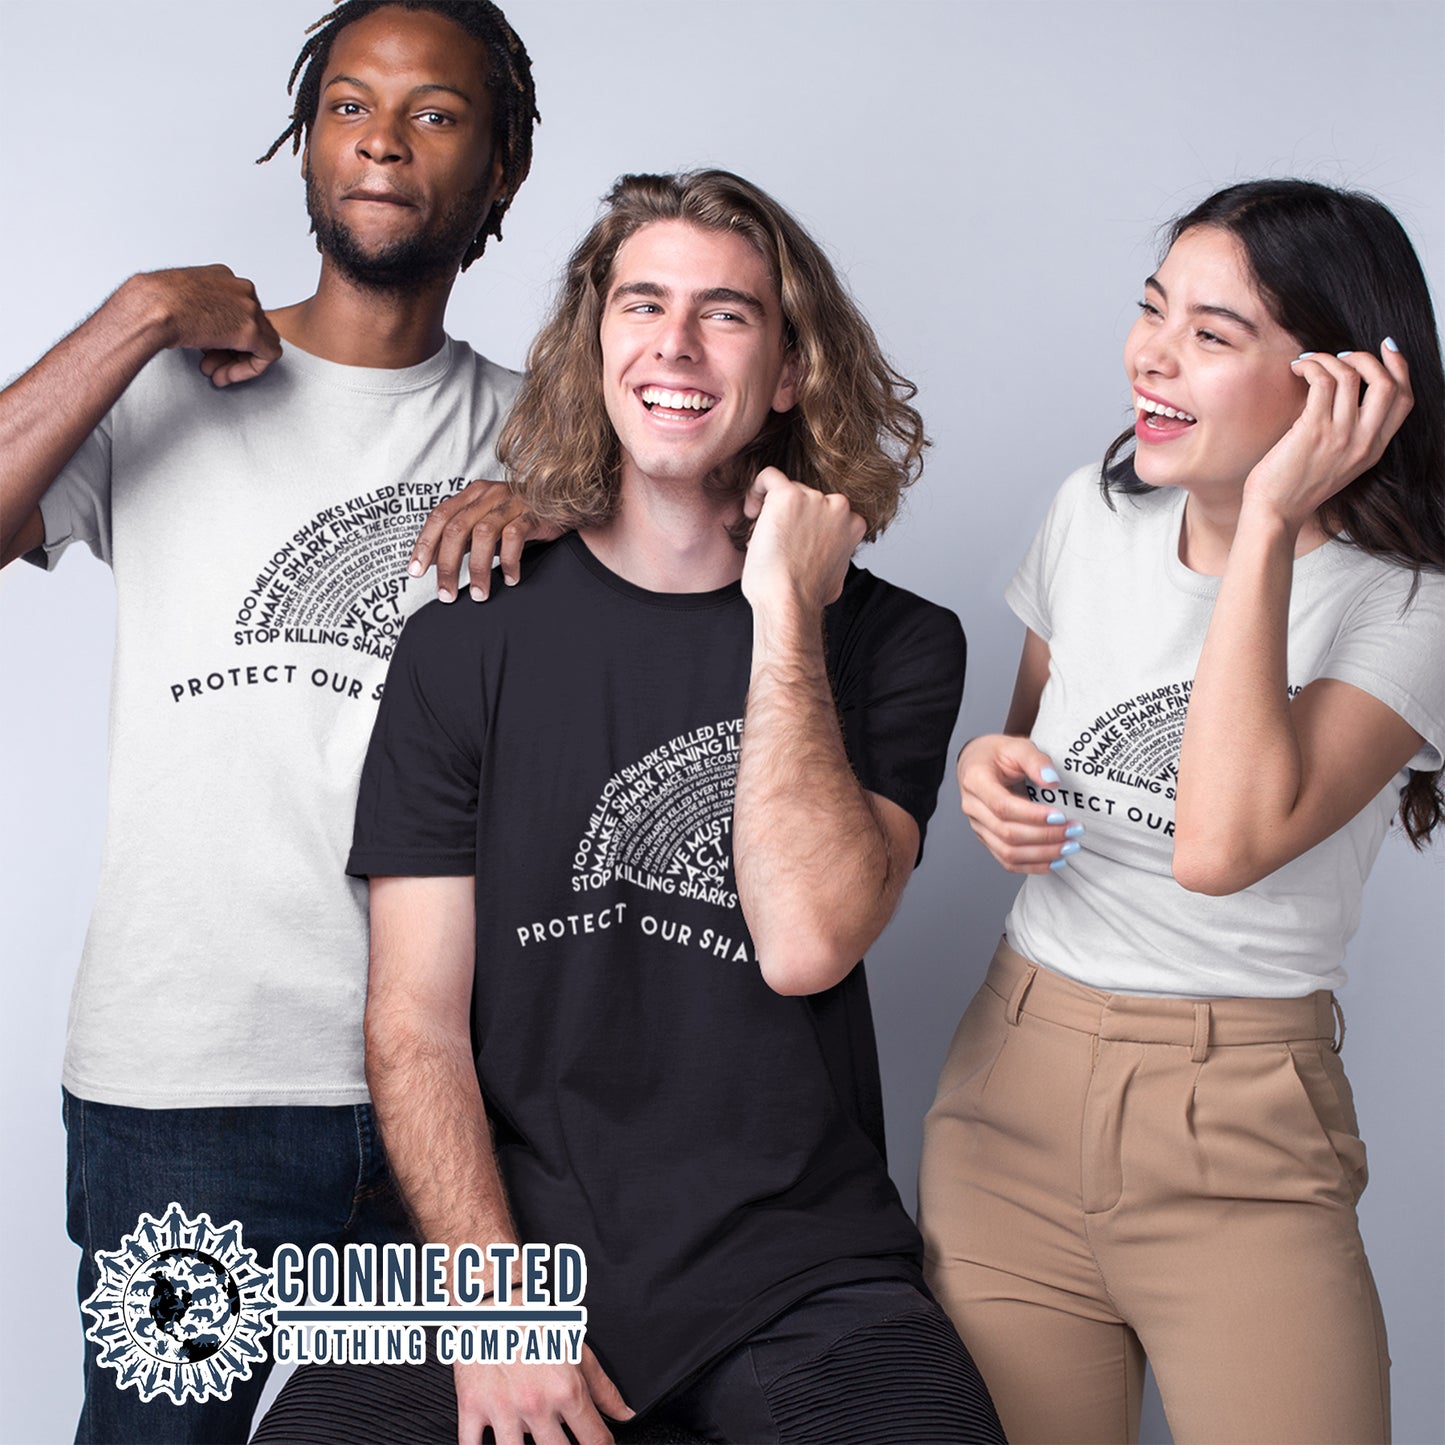 Black and White Protect Our Sharks Short-Sleeve Tees - nighttidemetalworks - Ethically and Sustainably Made - 10% of profits donated to shark conservation and ocean conservation